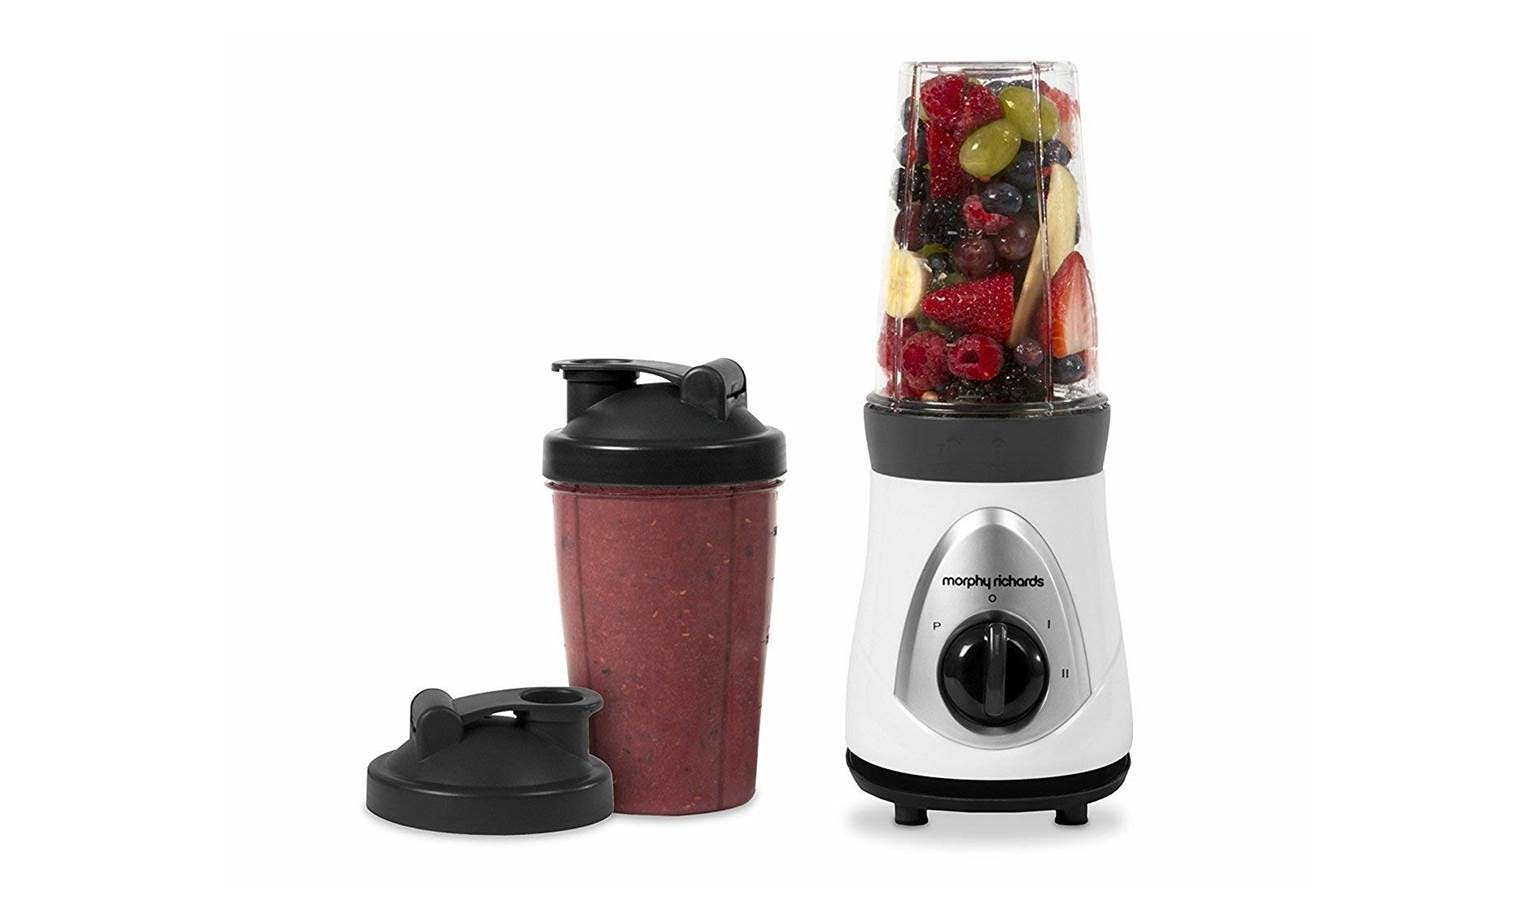 https://hnsgsfp.imgix.net/9/images/detailed/30/Morphy_Richards_403035_Personal_Blender.jpg?fit=fill&bg=0FFF&w=1536&h=900&auto=format,compress